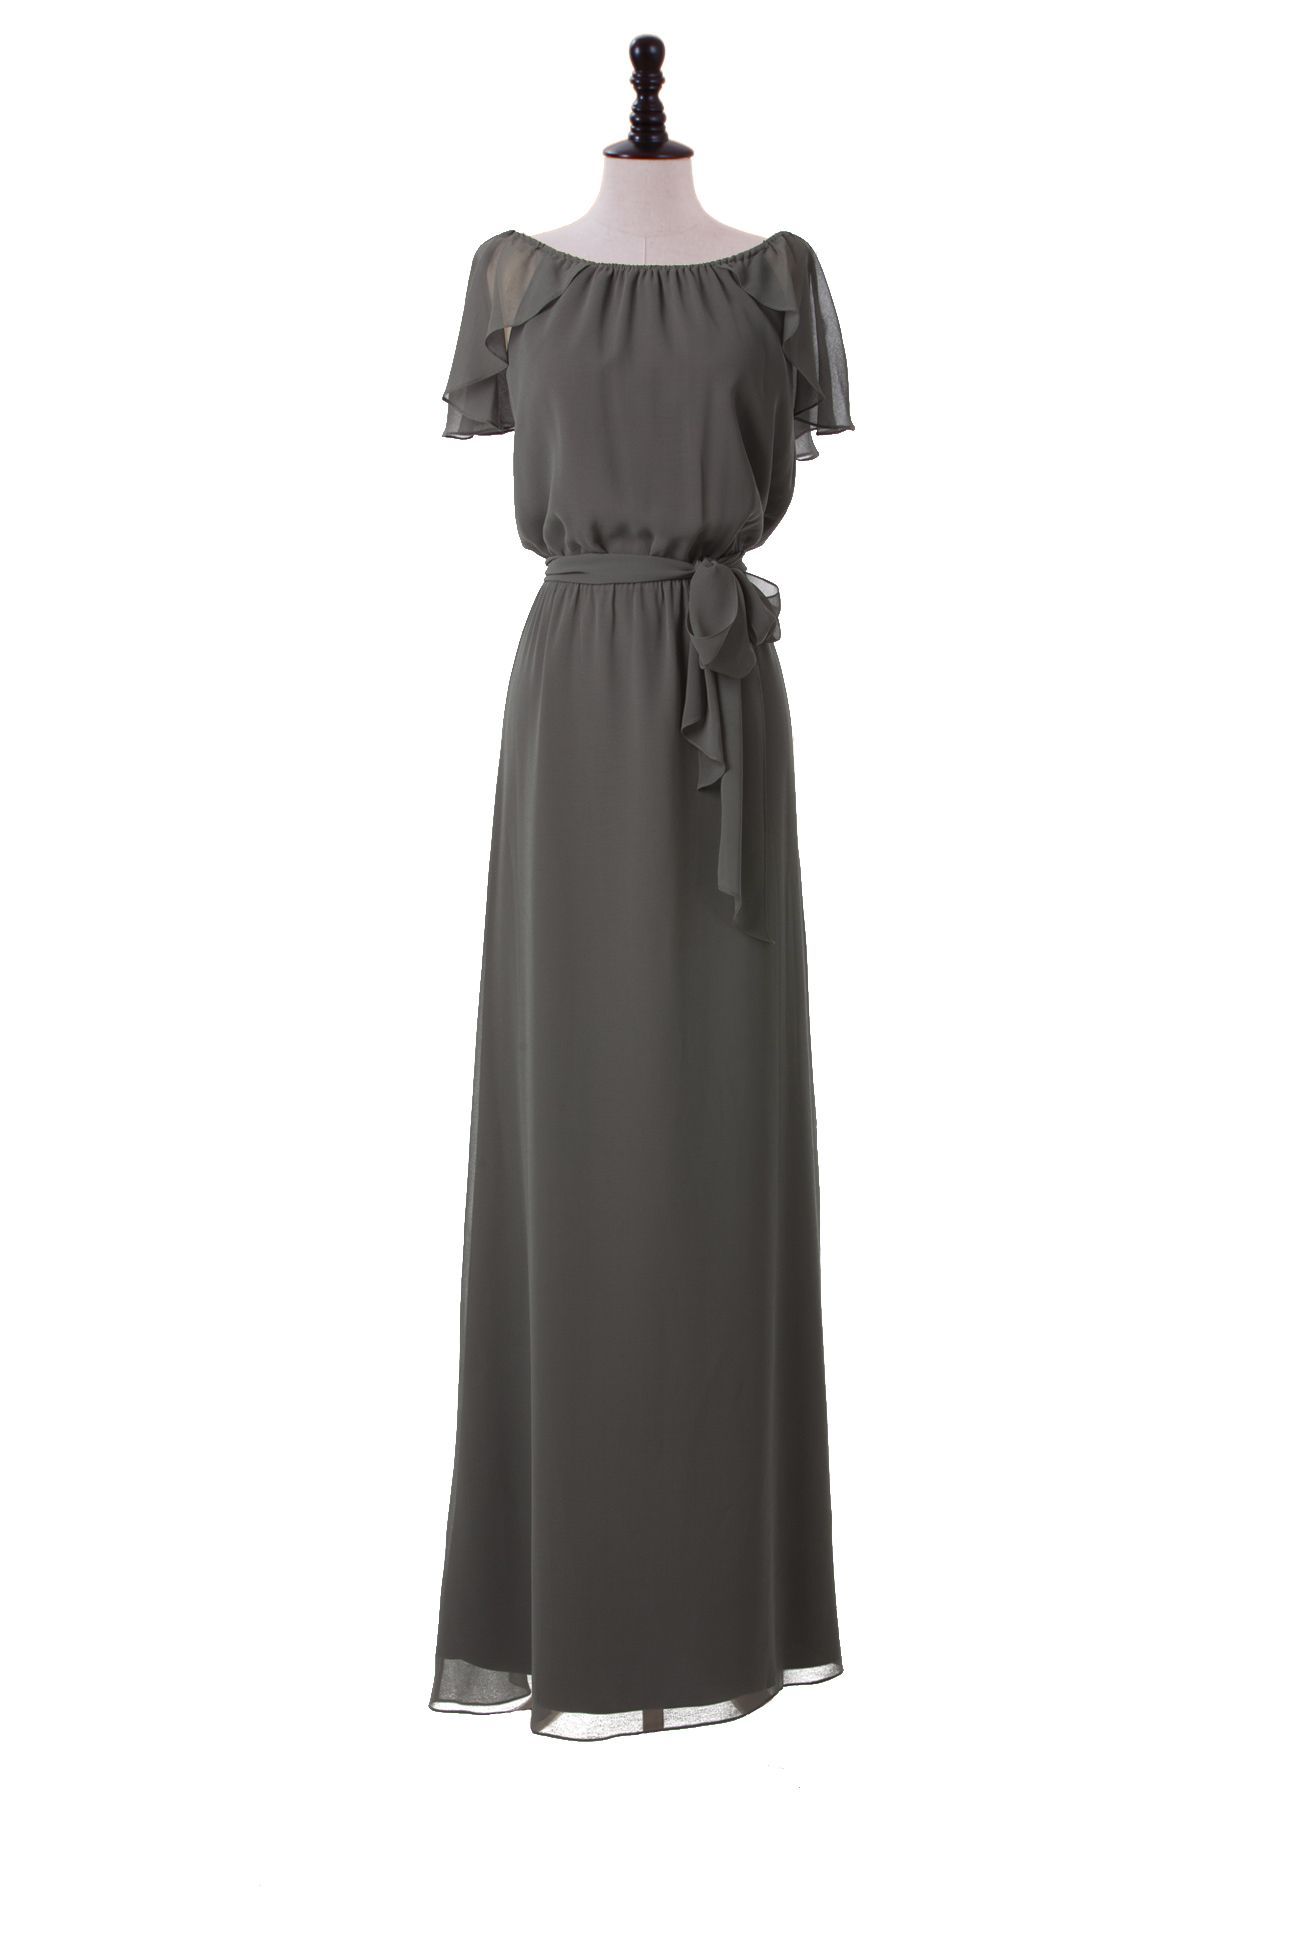 Pretty Floor Length Chiffon Dress With Bateau Neckline And Capped Sleeve